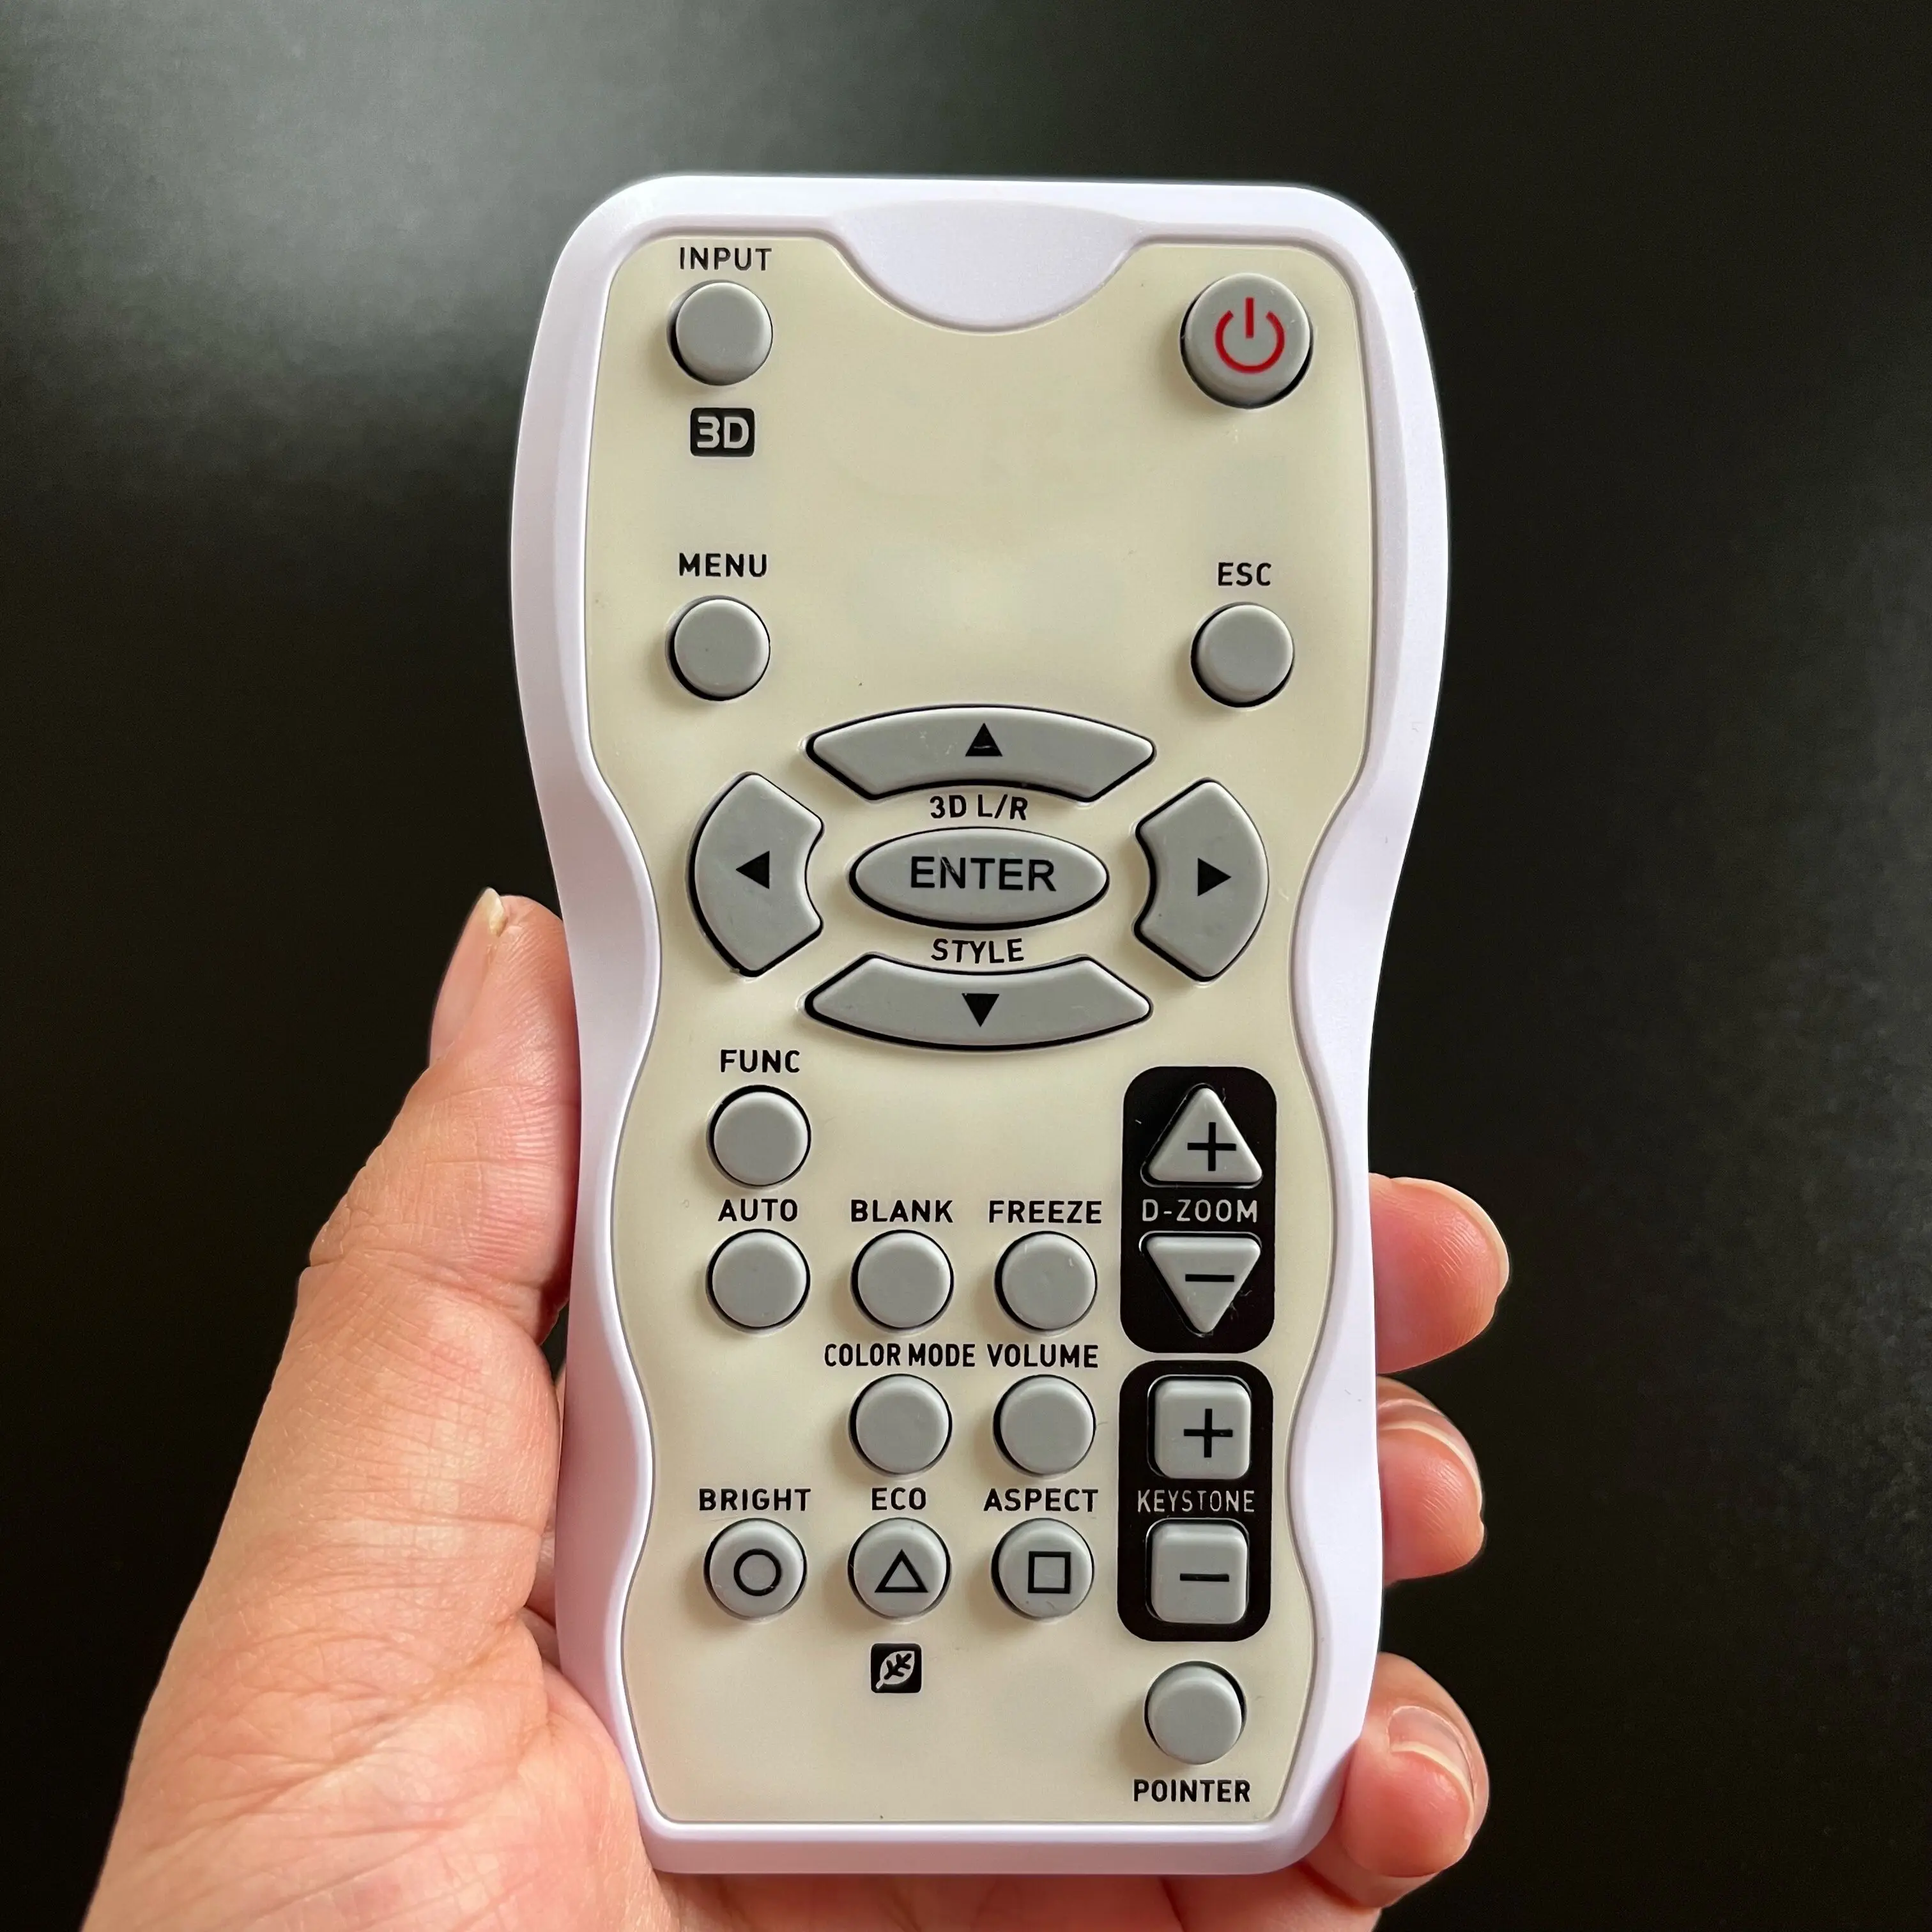 

NEW Projector Remote Control YT-120 For Casio YT120 XJ-M130 XJ-M140 XJ-M150 XJ-M230 XJ-M240 XJ-M250 XJ-M245 XJ-M255 projector